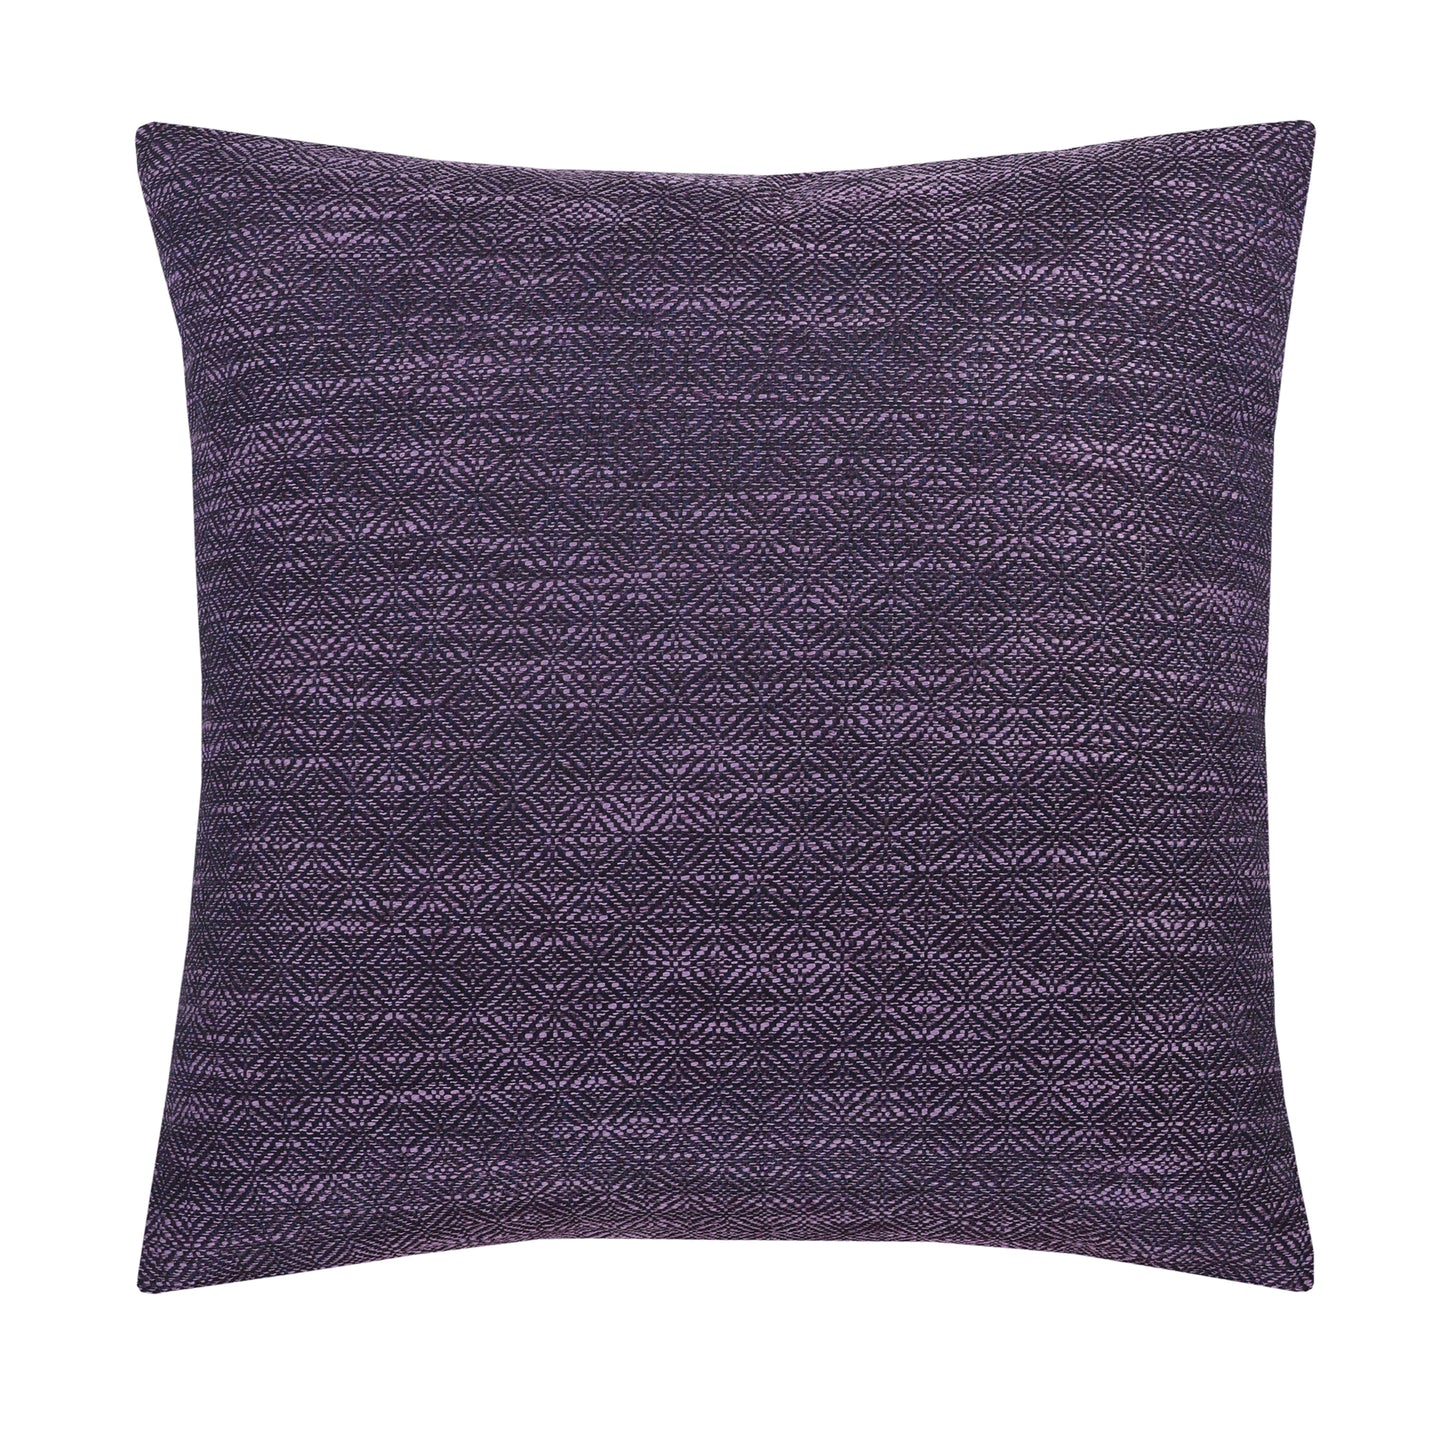 Violet Linen Chenille Diamond Weave Pattern, Faux Linen Polyester Fabric,  Waterproof for Indoor and outdoor use, 18 Inch x 18 Inch, Square, Decorative Accent Throw Pillow Cover